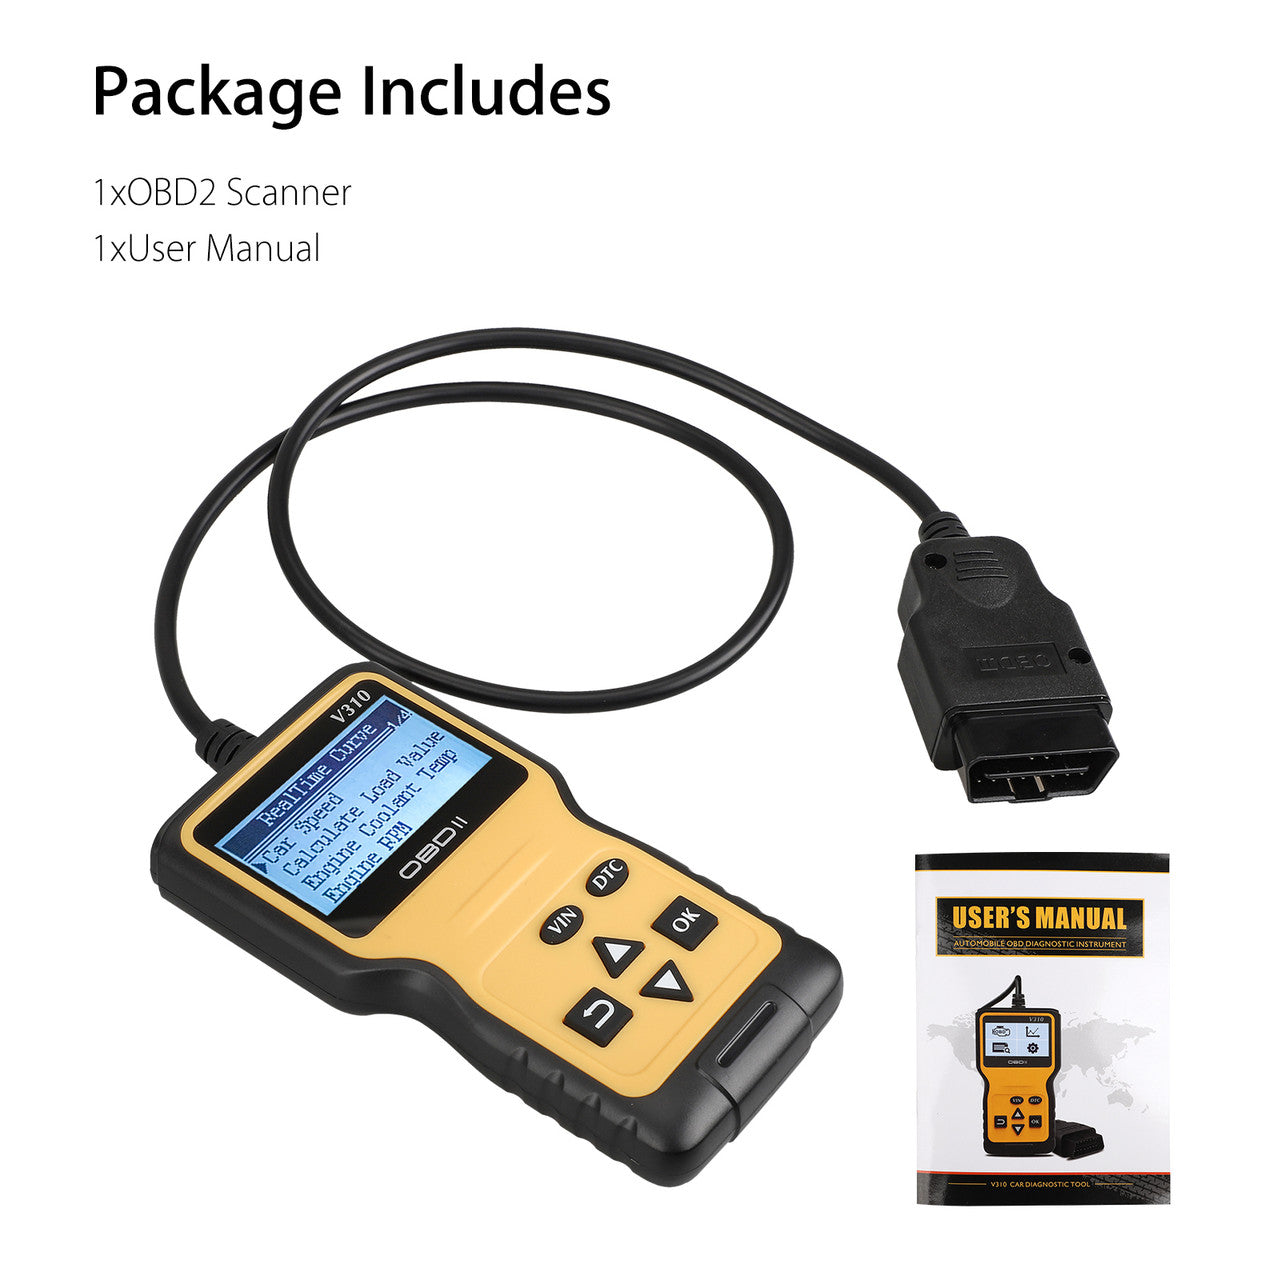 OBD2 Scanner, OBD Reader Enhanced Universal Car Engine Fault Code Reader,Car Engine Fault Code Reader CAN Diagnostic Scan Tool for All OBD Protocol Cars Since 1996